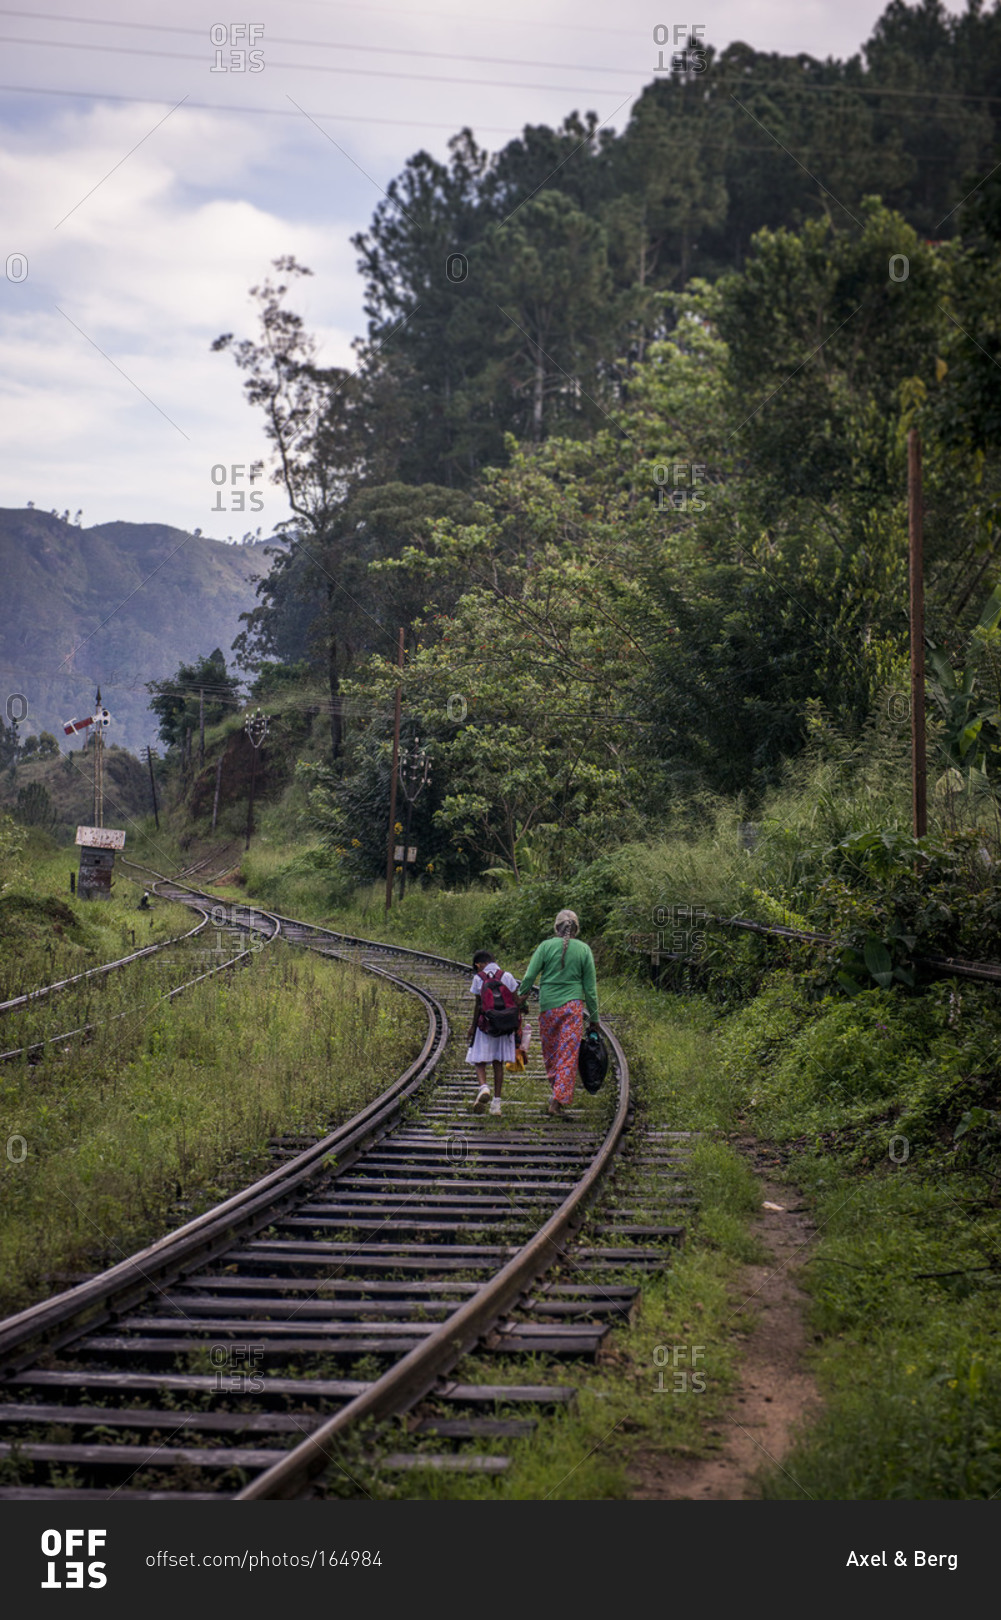 Back view of woman and child walking on train tracks